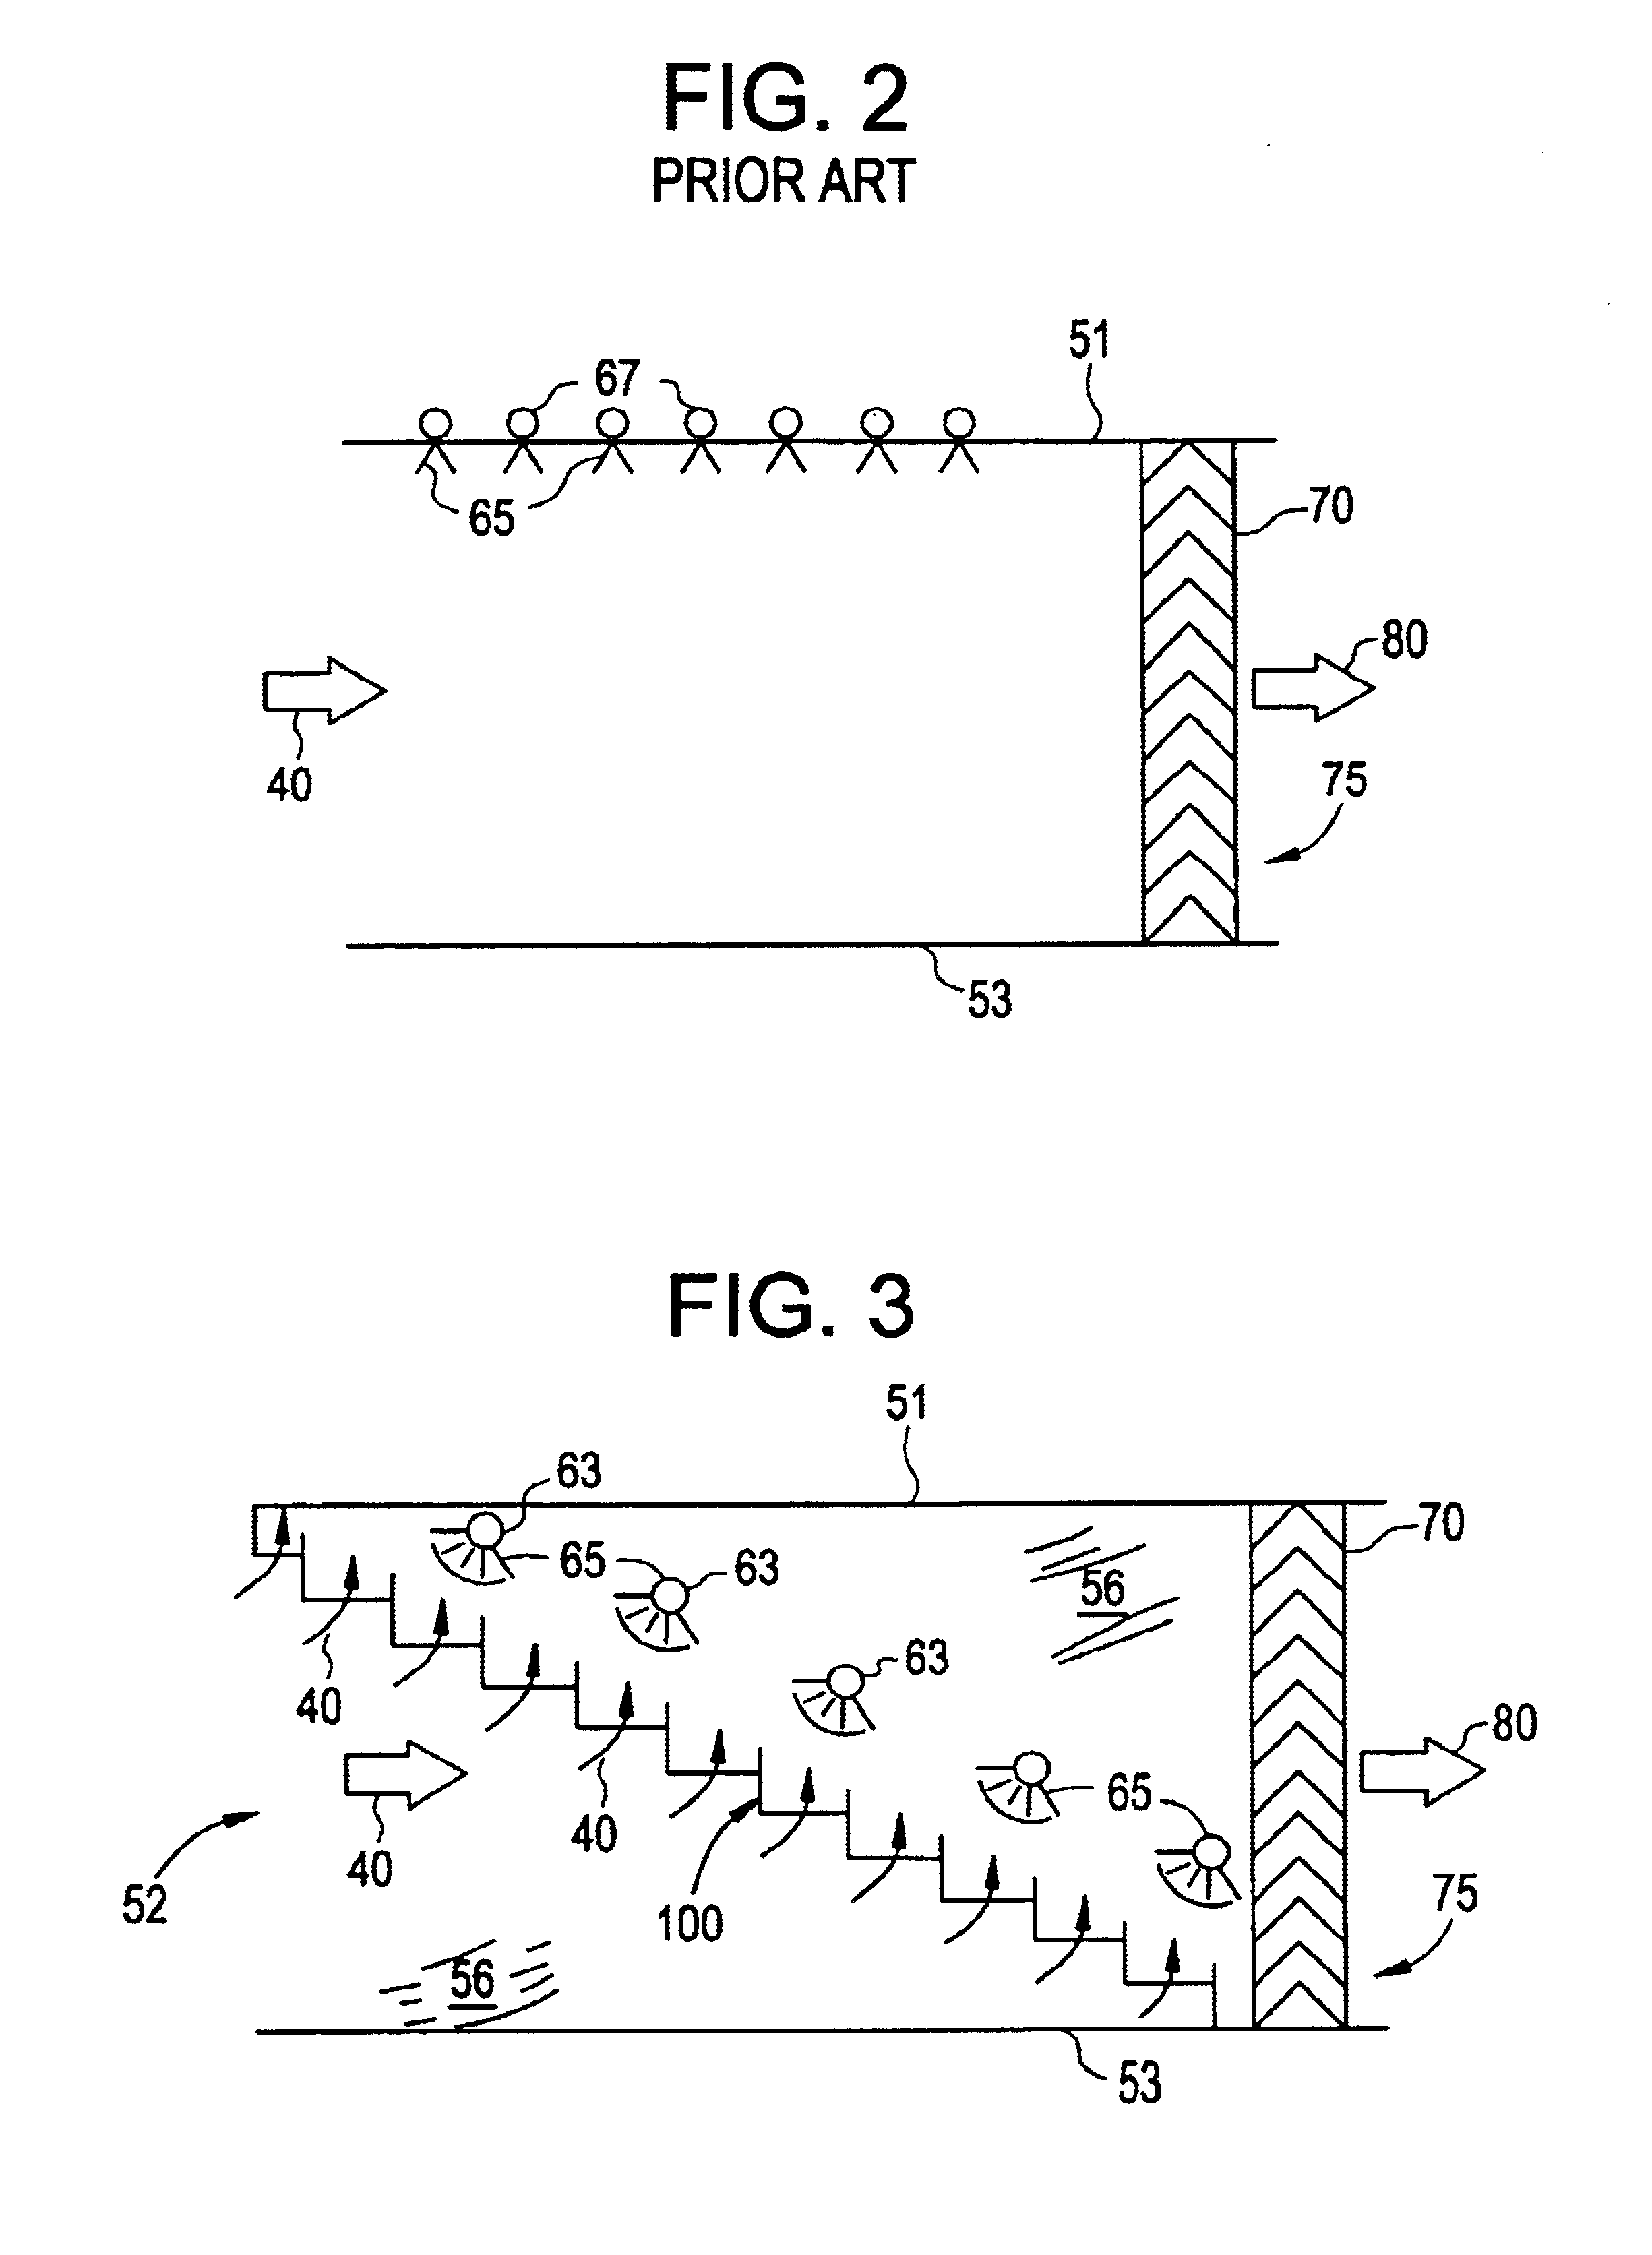 Flue gas desulfurization system with a stepped tray